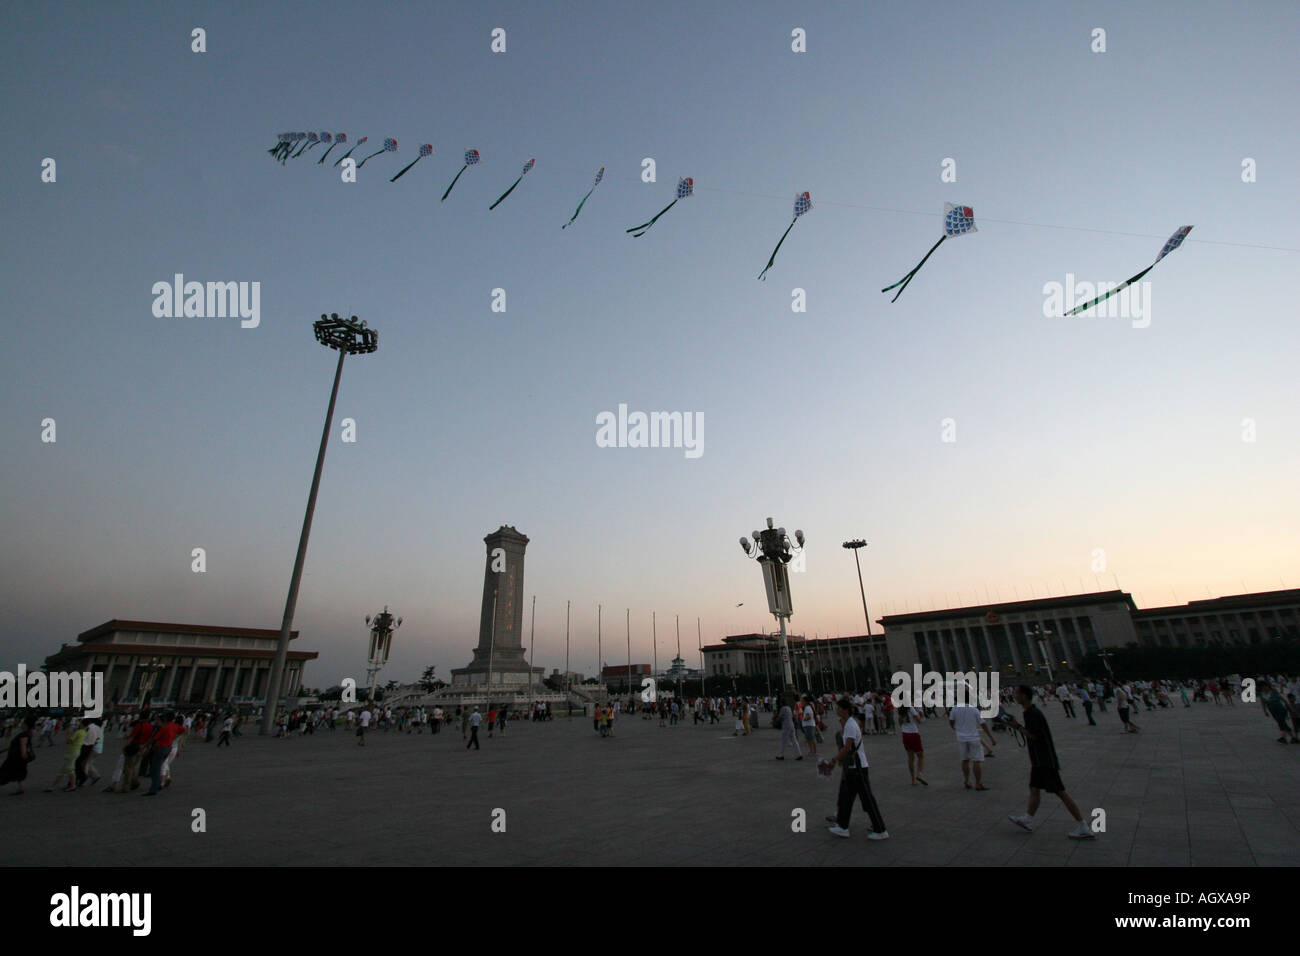 Fly a kite in Tiananmen square Beijing China August 2007 Stock Photo